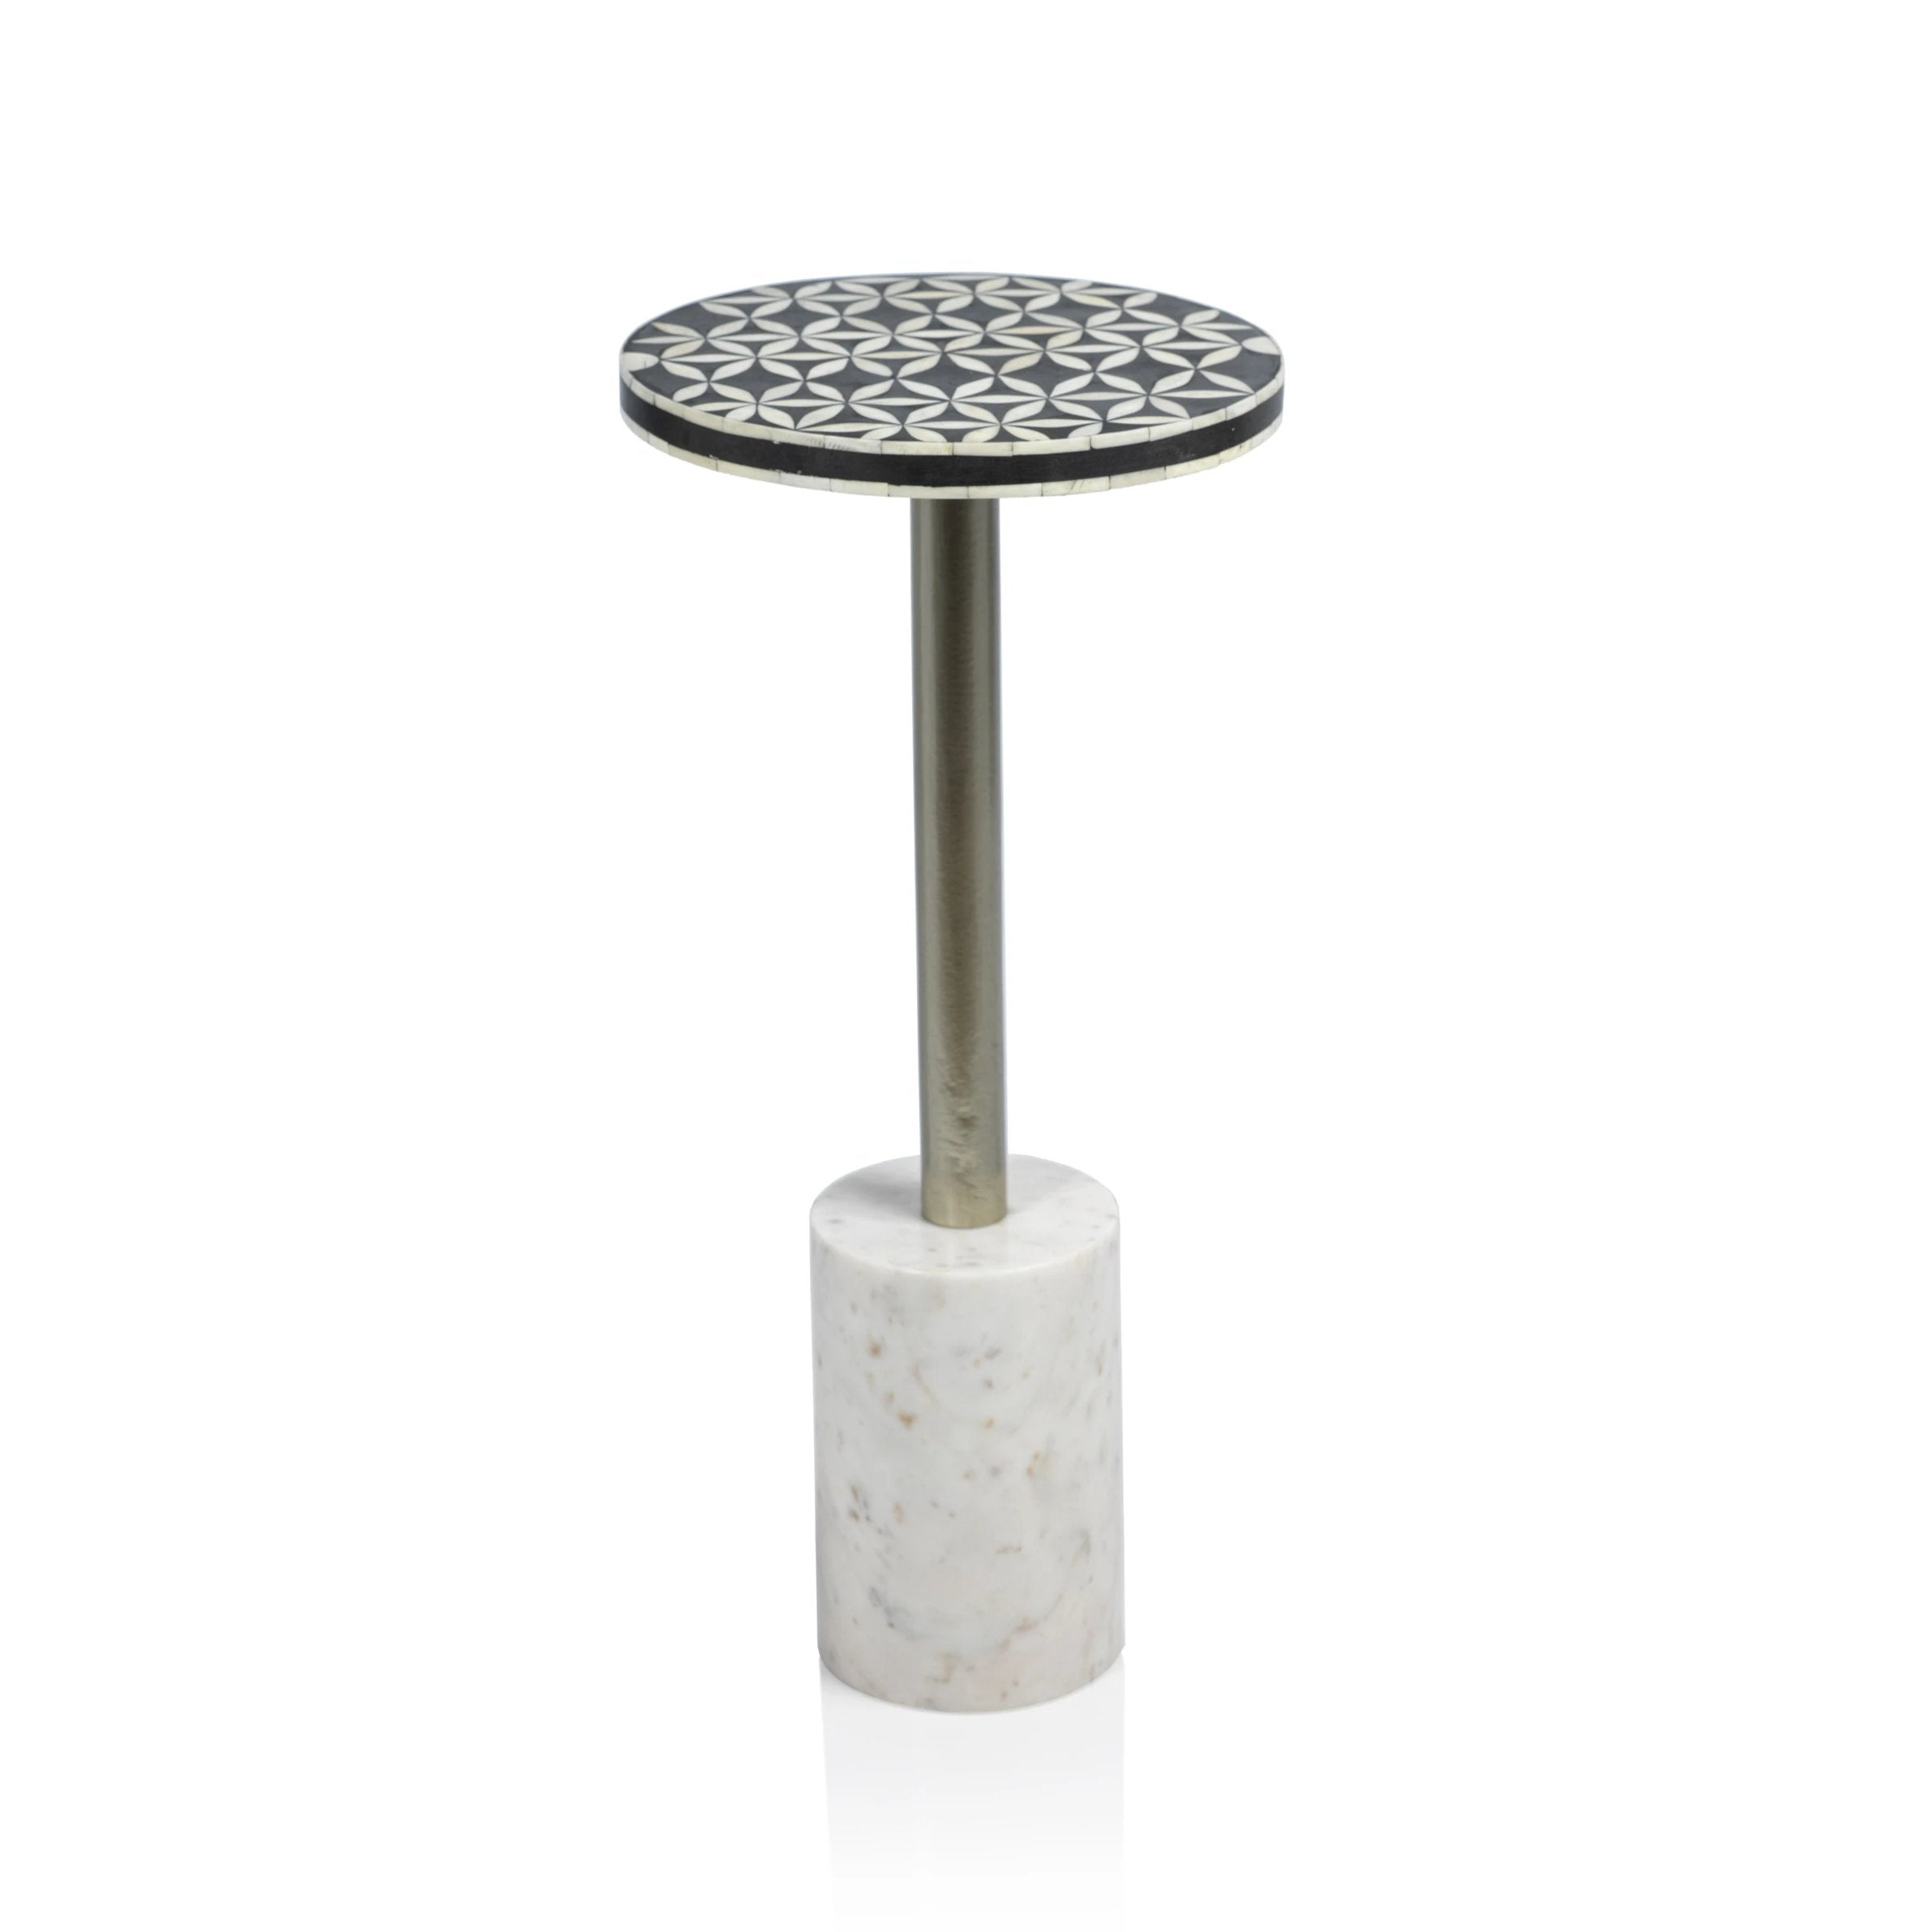 Sultana Round Cocktail Table on Marble Base - CARLYLE AVENUE